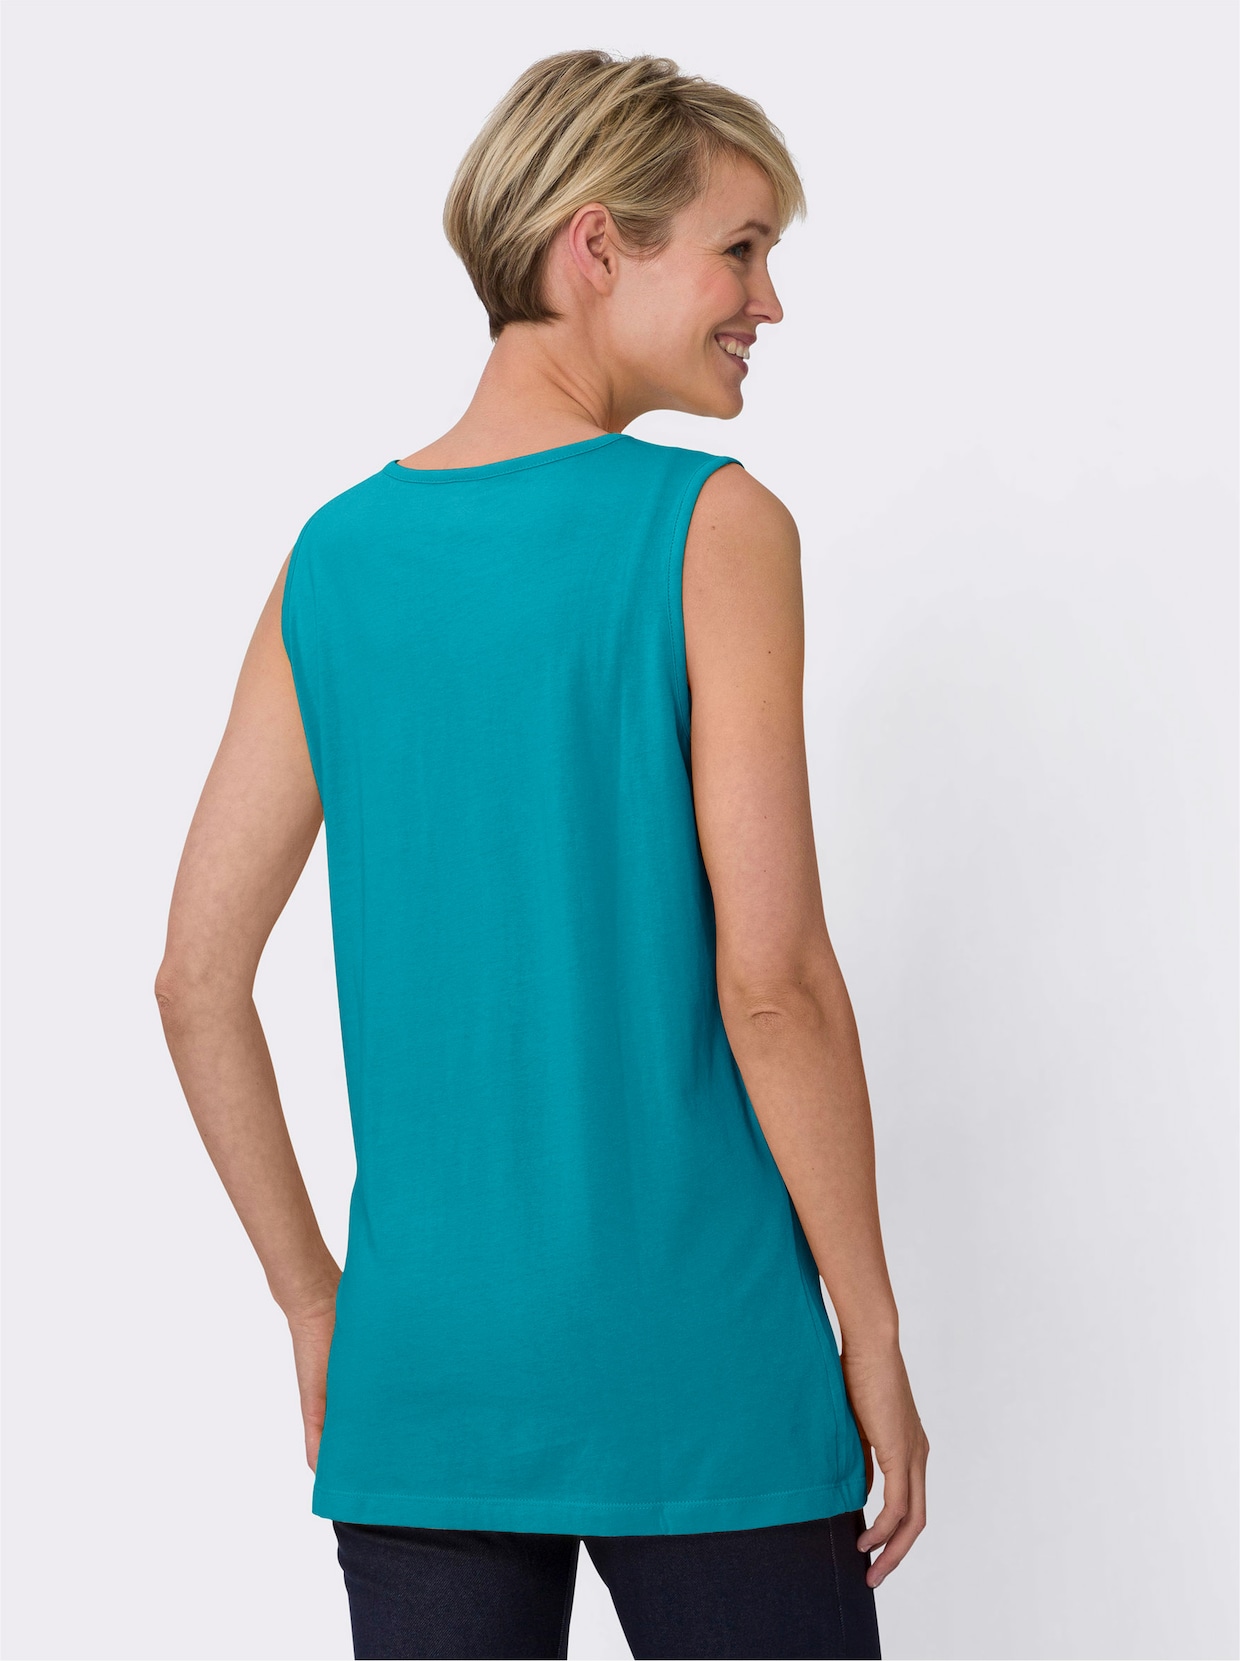 Longtop - turquoise